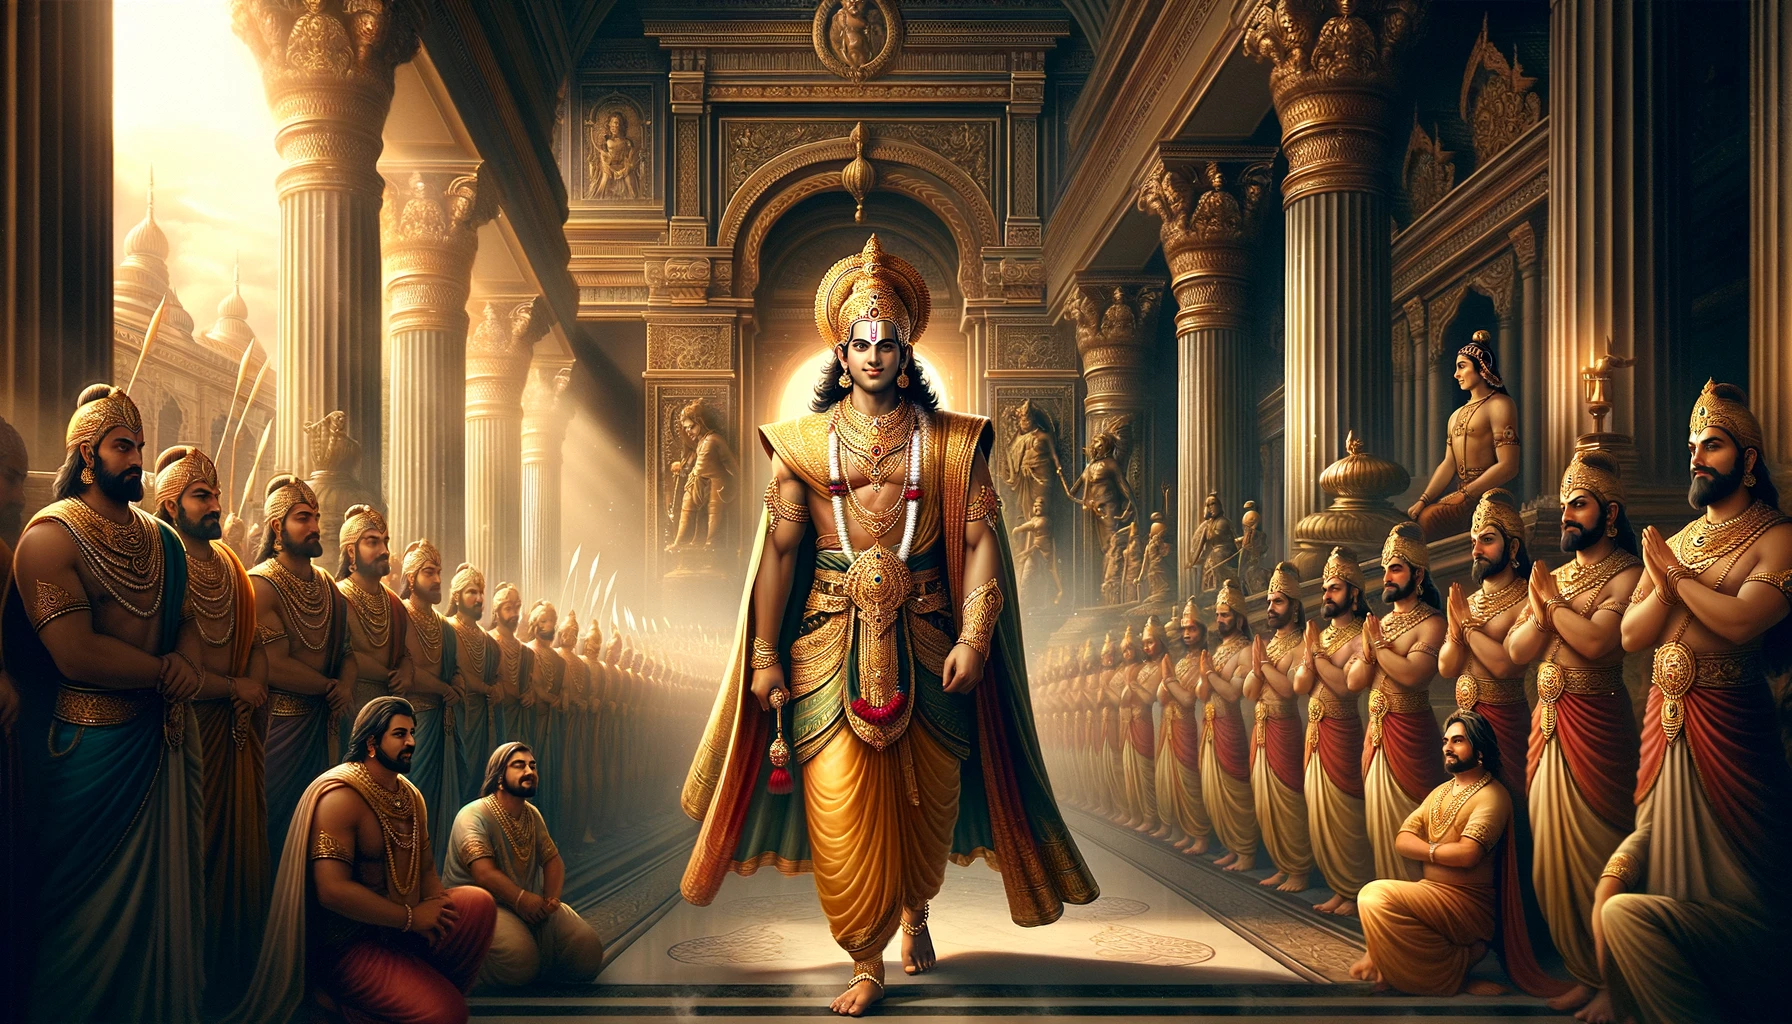 Rama Enters His Father’s Palace